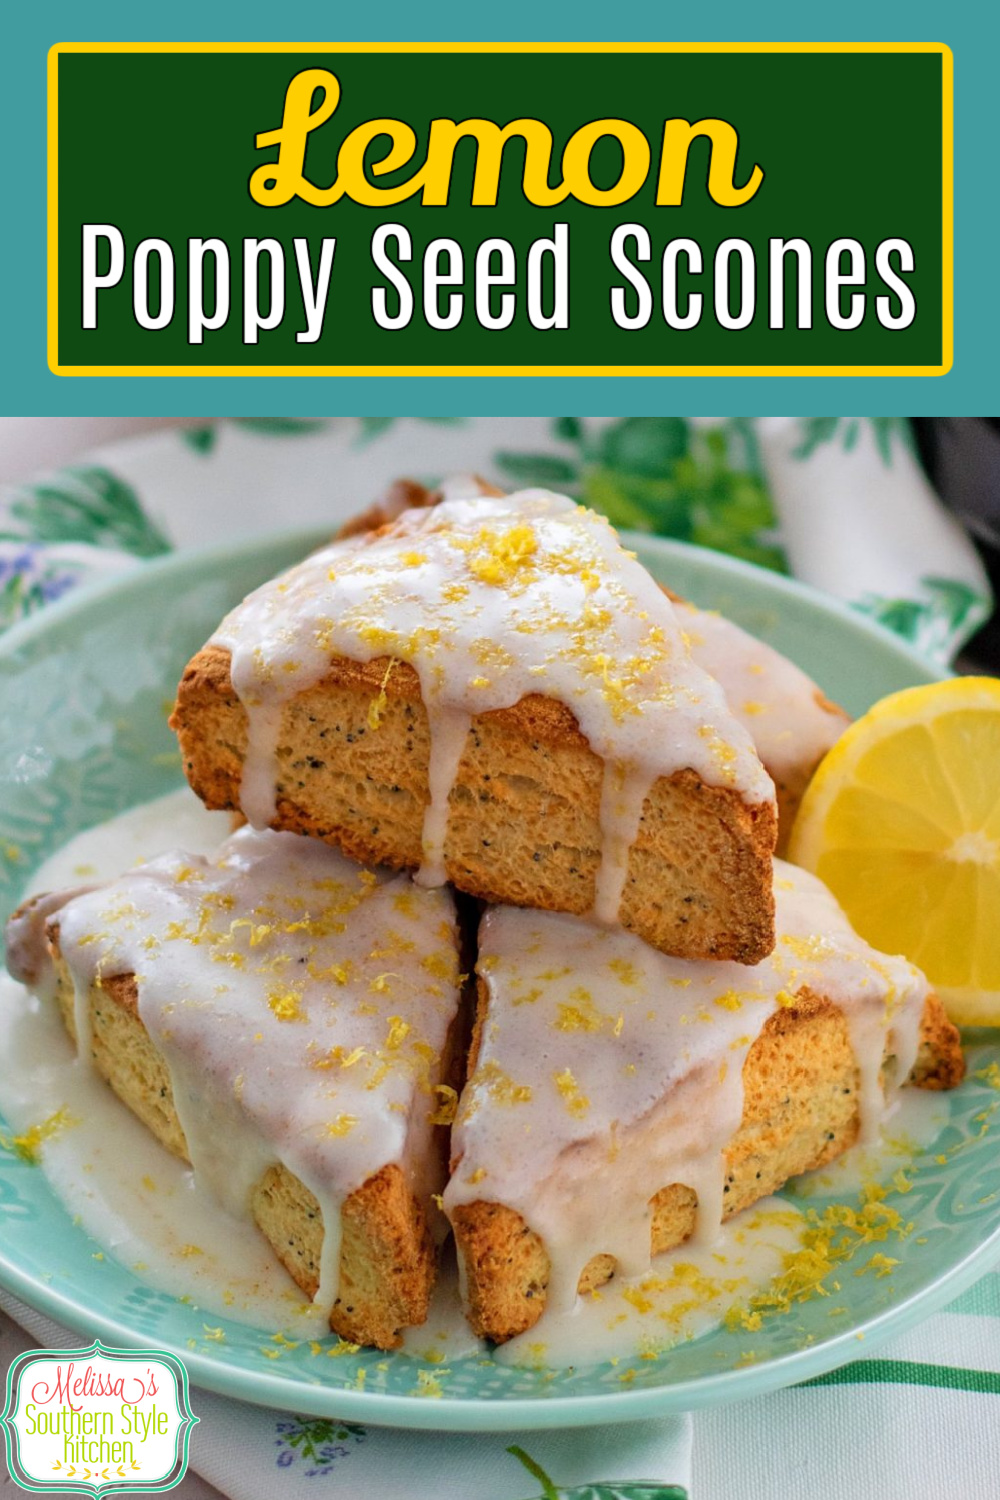 Add these irresistible Lemon Poppy Seed Scones to your brunch menu slathered with blueberry preserves, lemon curd or whipped cream #lemonpoppyseedscones #lemonscones #sconesrecipes #brunch #breakfast #breads via @melissasssk